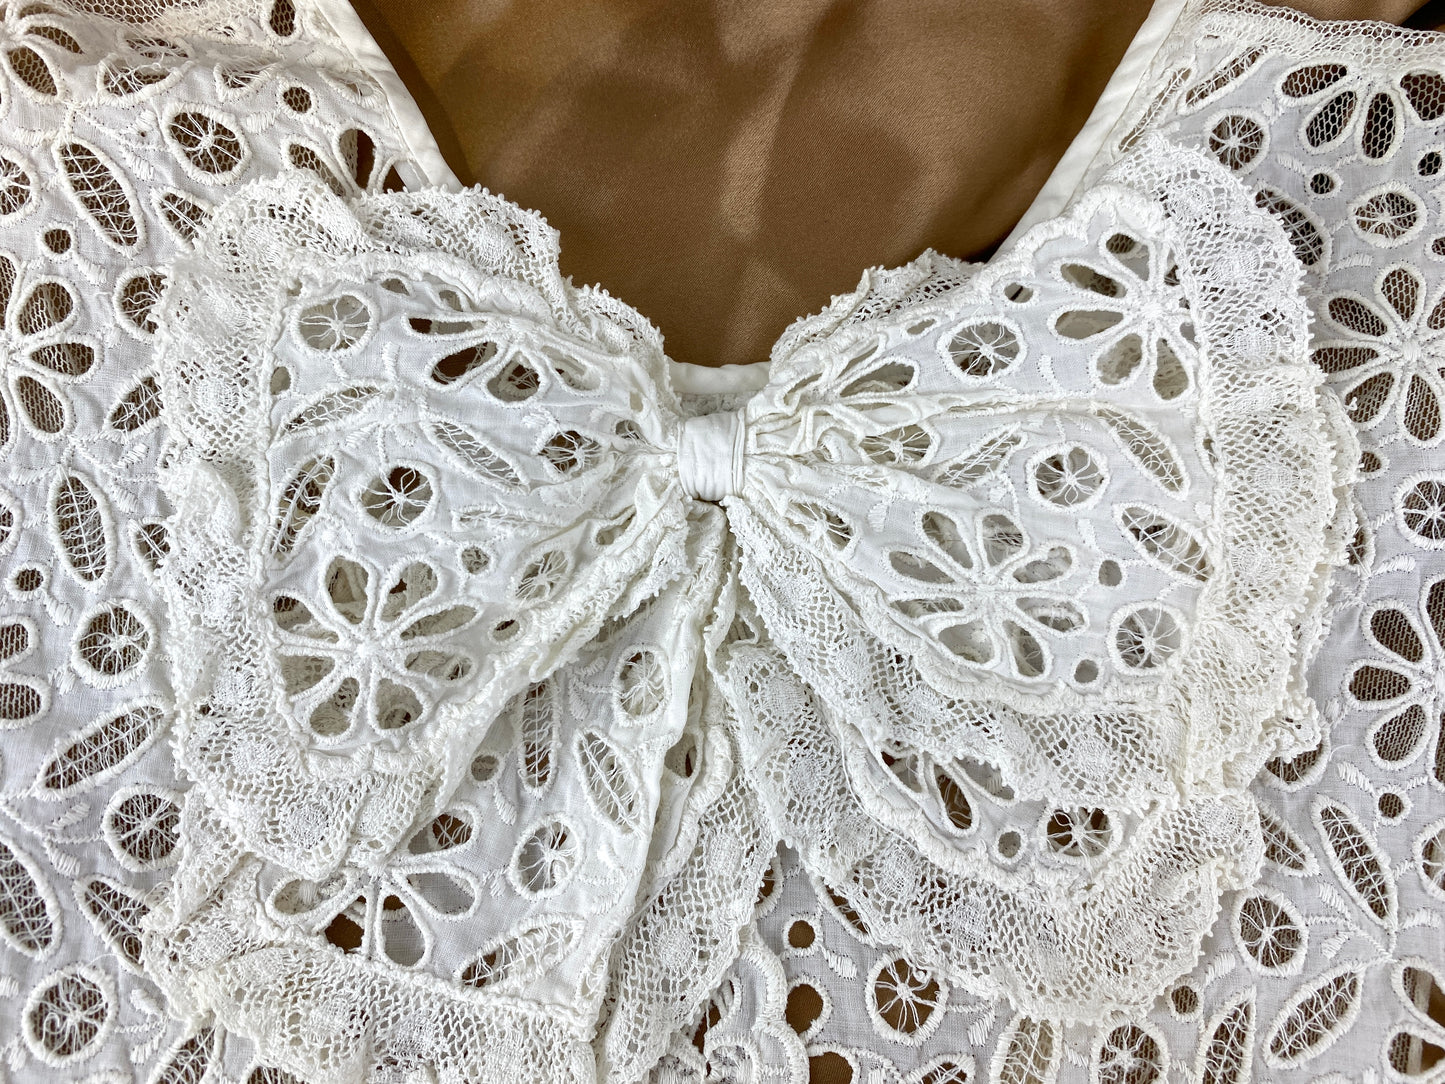 Vintage 1930s White Cotton Cutwork Embroidery Bib Vest With Bow